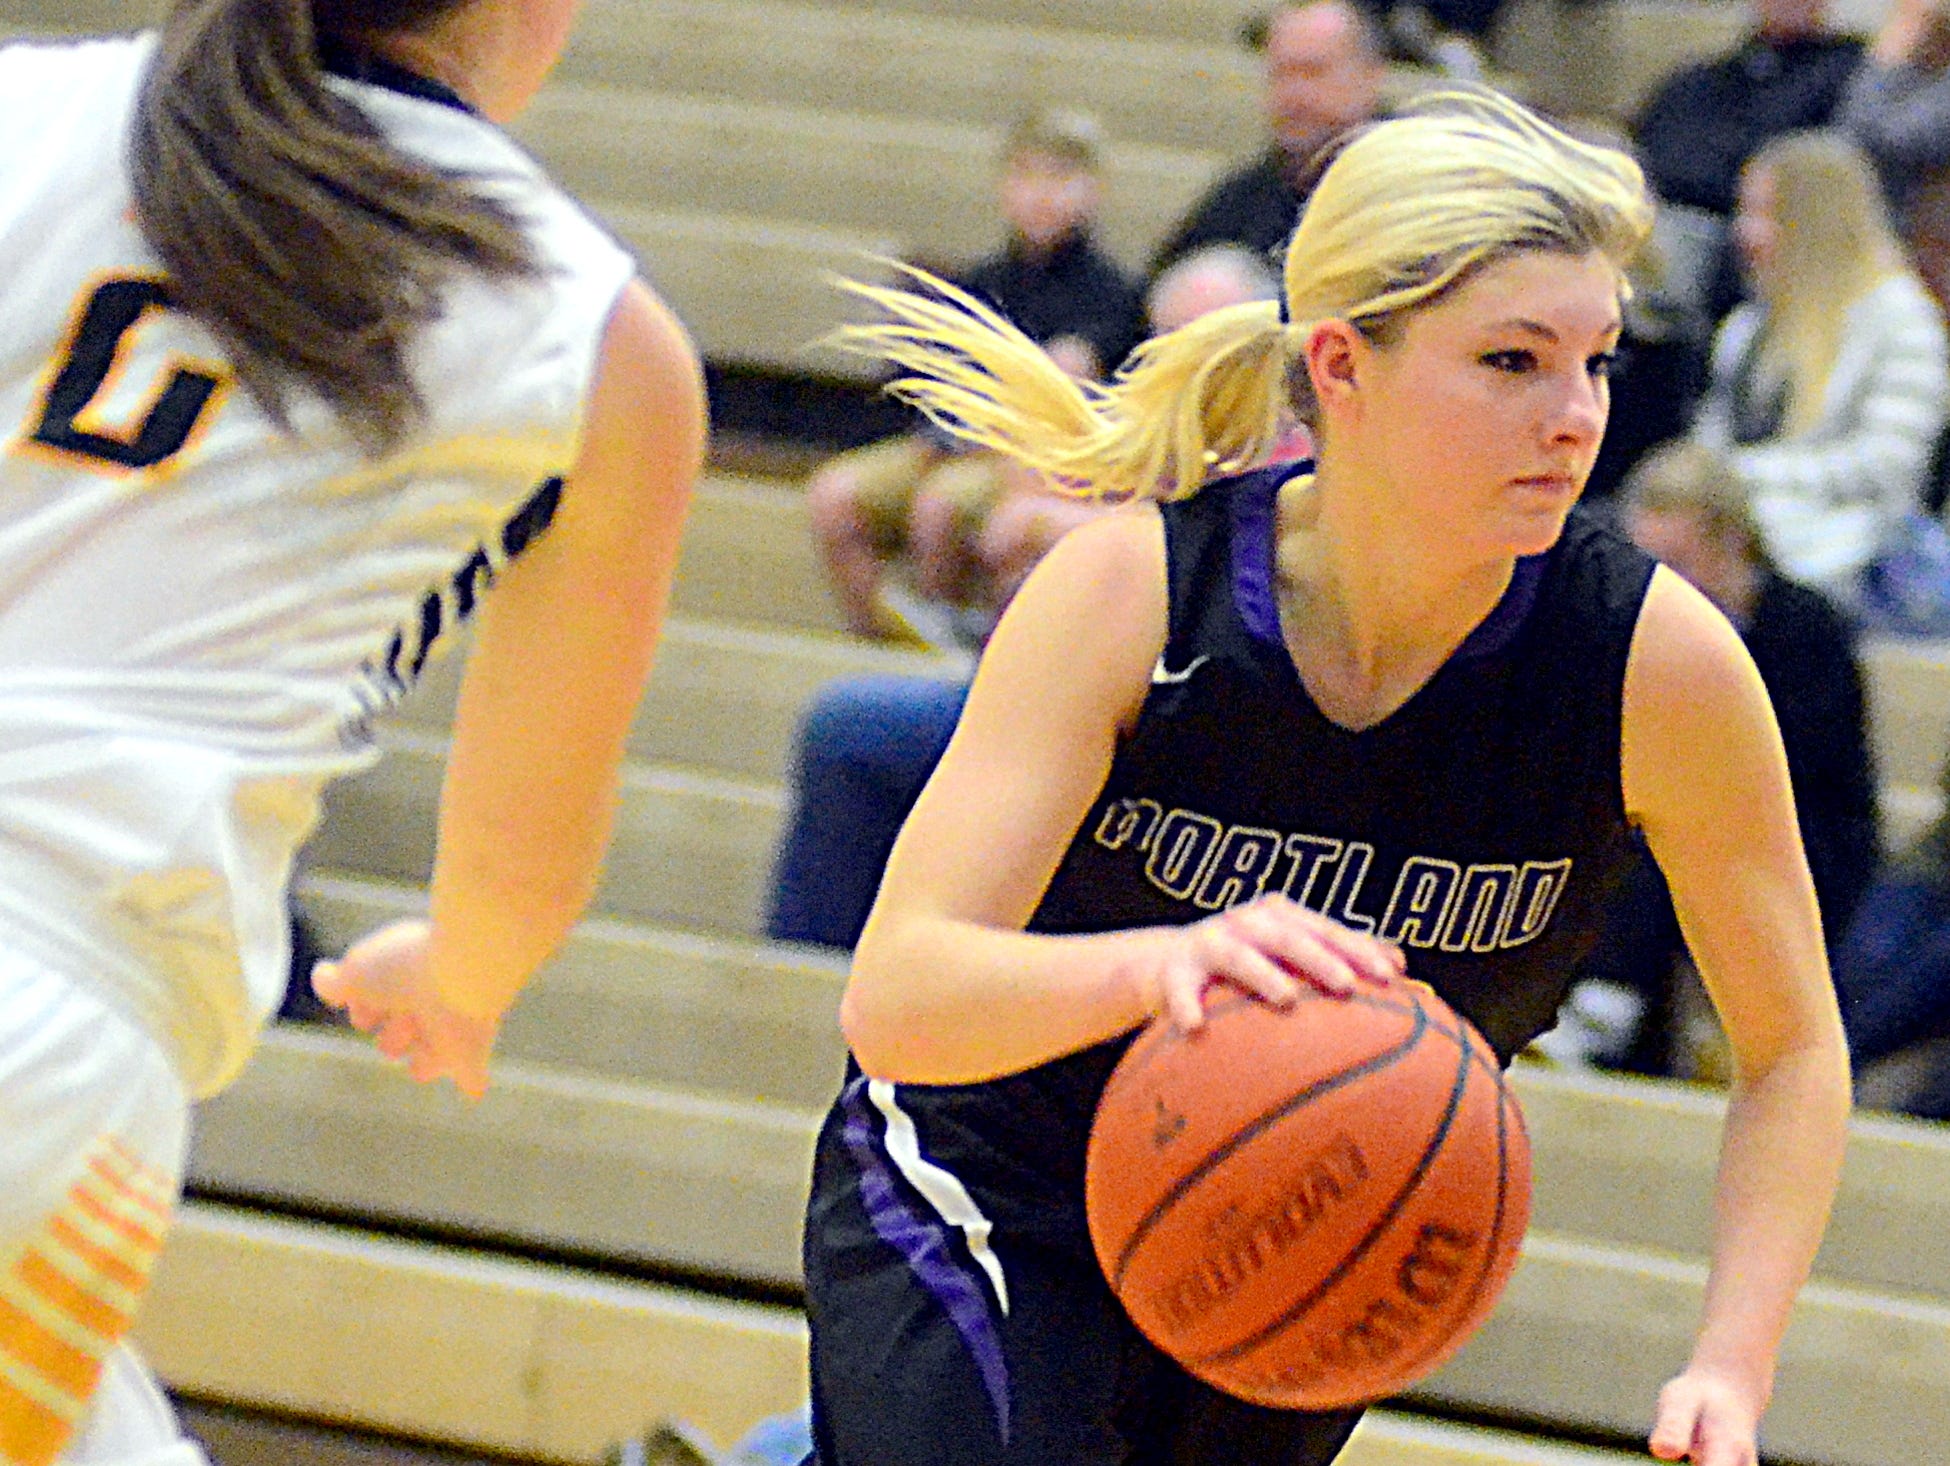 Portland High senior guard Erica Keen drives into the lane during second-quarter action. Keen scored four points.